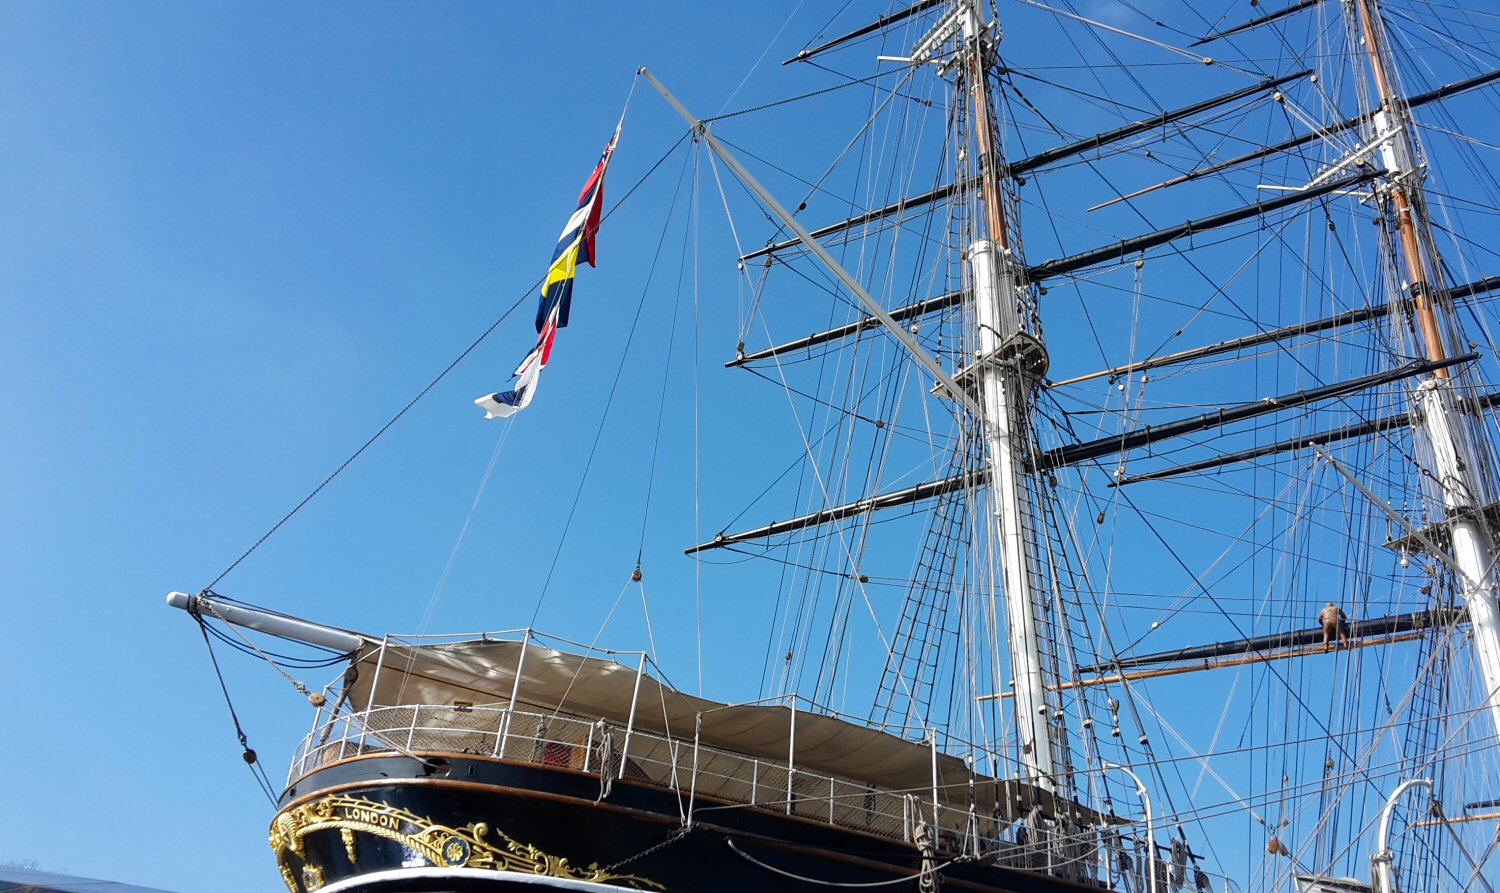 Visiting the Cutty Sark in Greenwich after a boat ride along the Thames